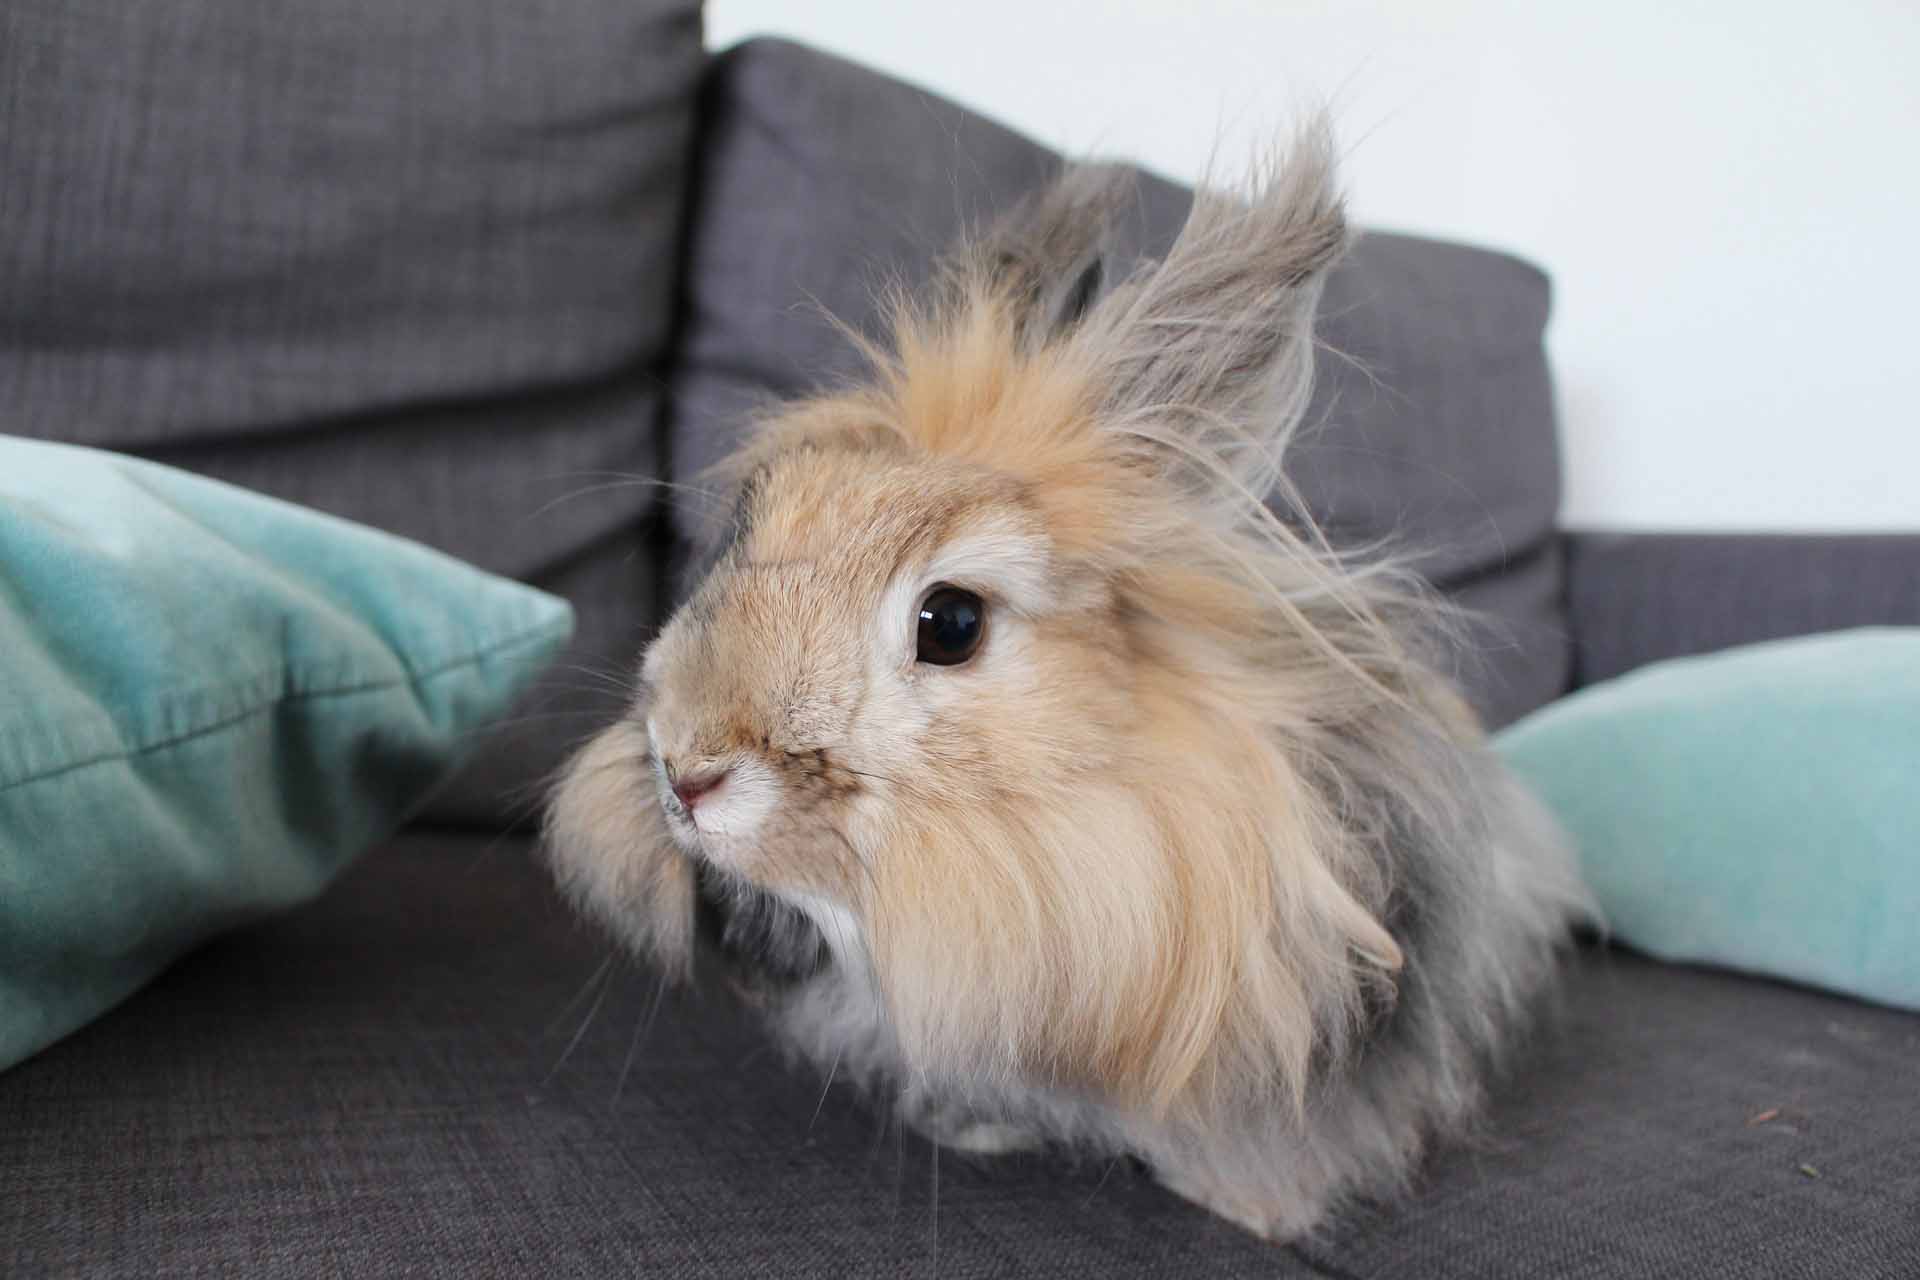 A grey and brown angora rabbit sitting on a grey couch with blue pillows.